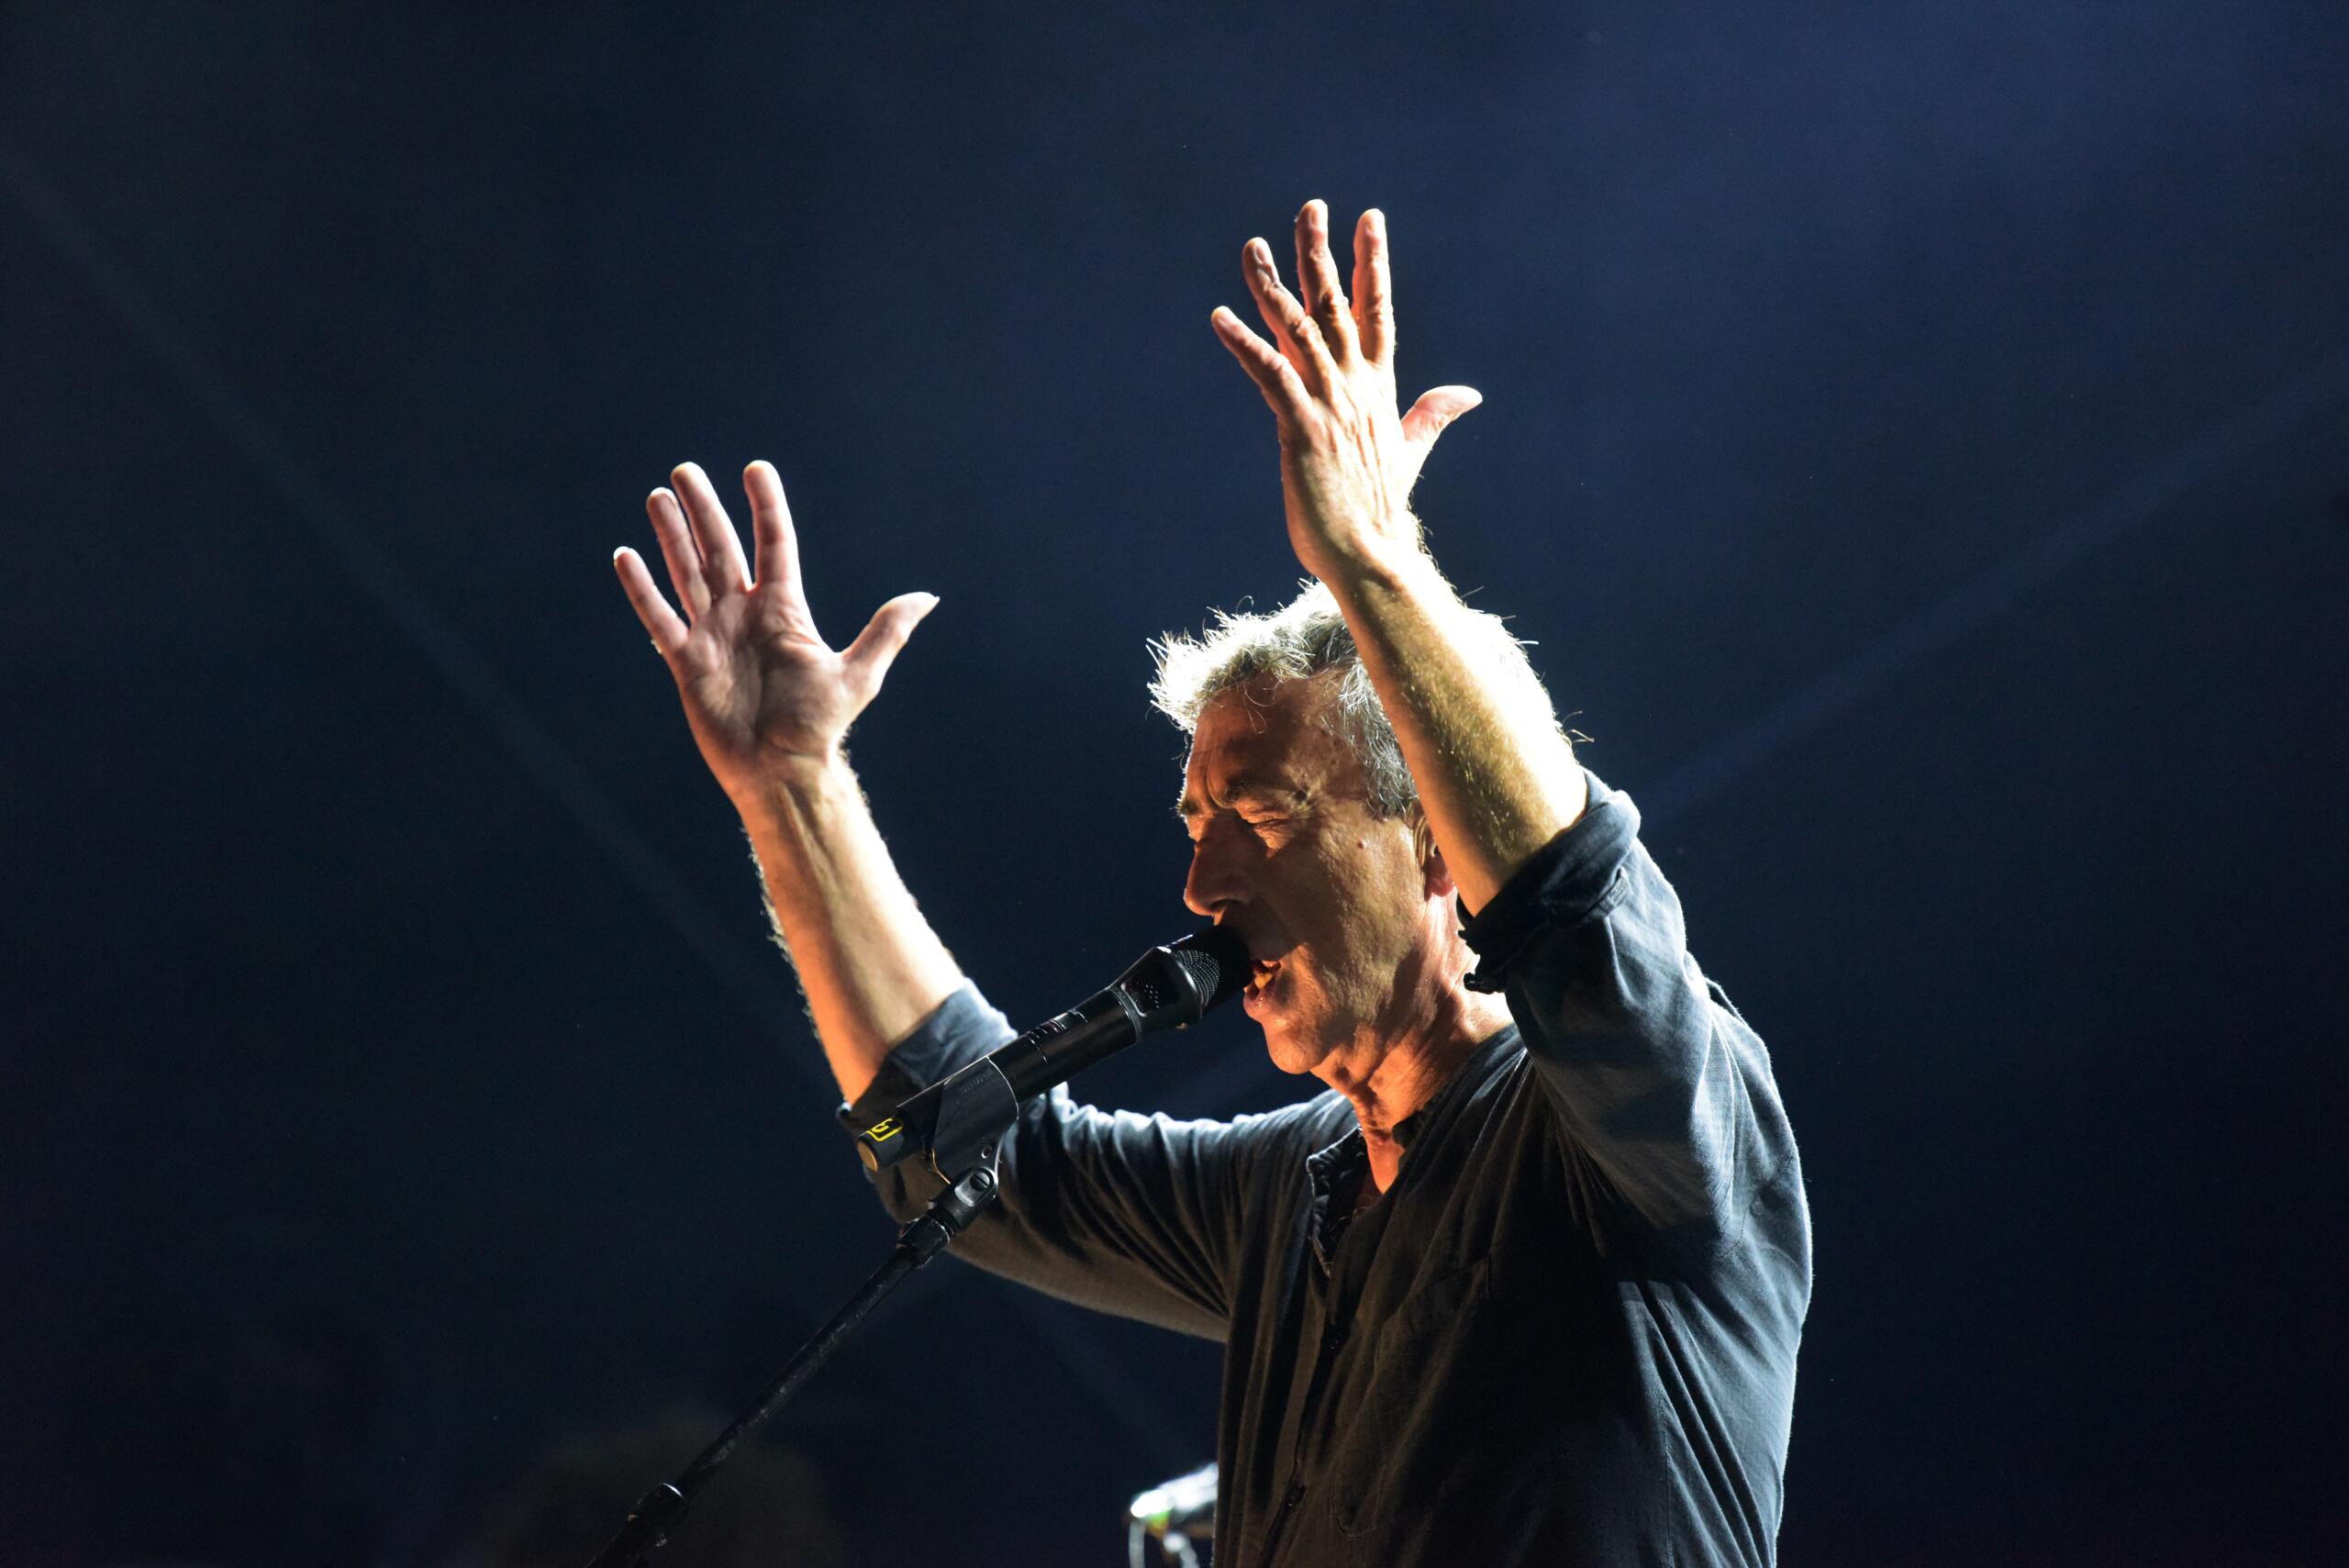 Portrait of the musician Hubert von Goisern. He stands on a stage, sings into a microphone and raises both arms.